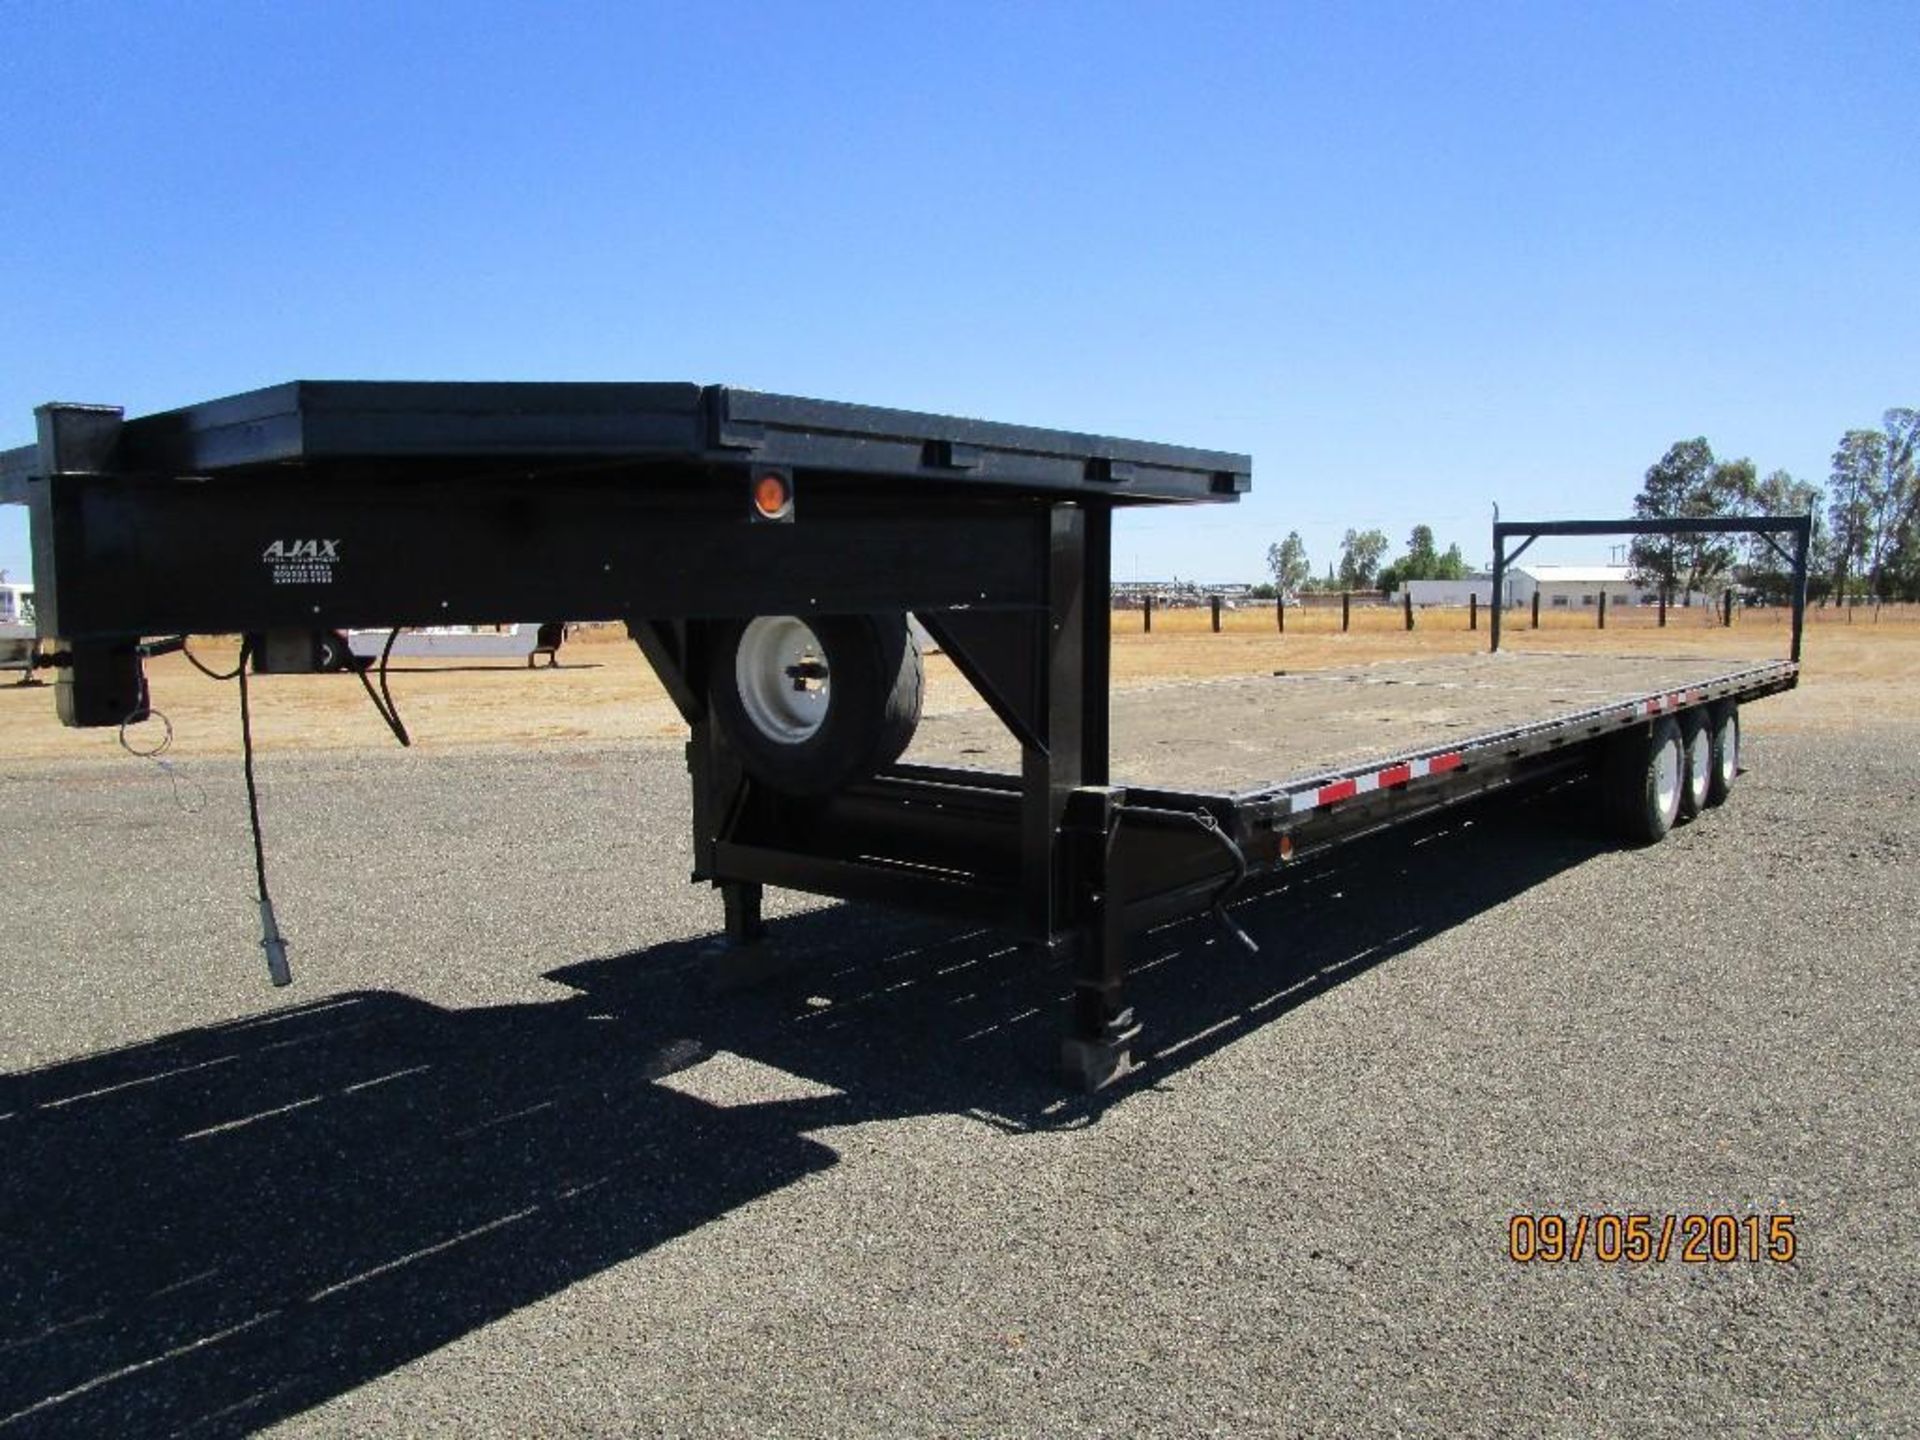 Wood Deck, Bottom 32', Top 8' GVWR 24,000 lbs. Equipped with: Stake Pockets Electric Brakes Tires